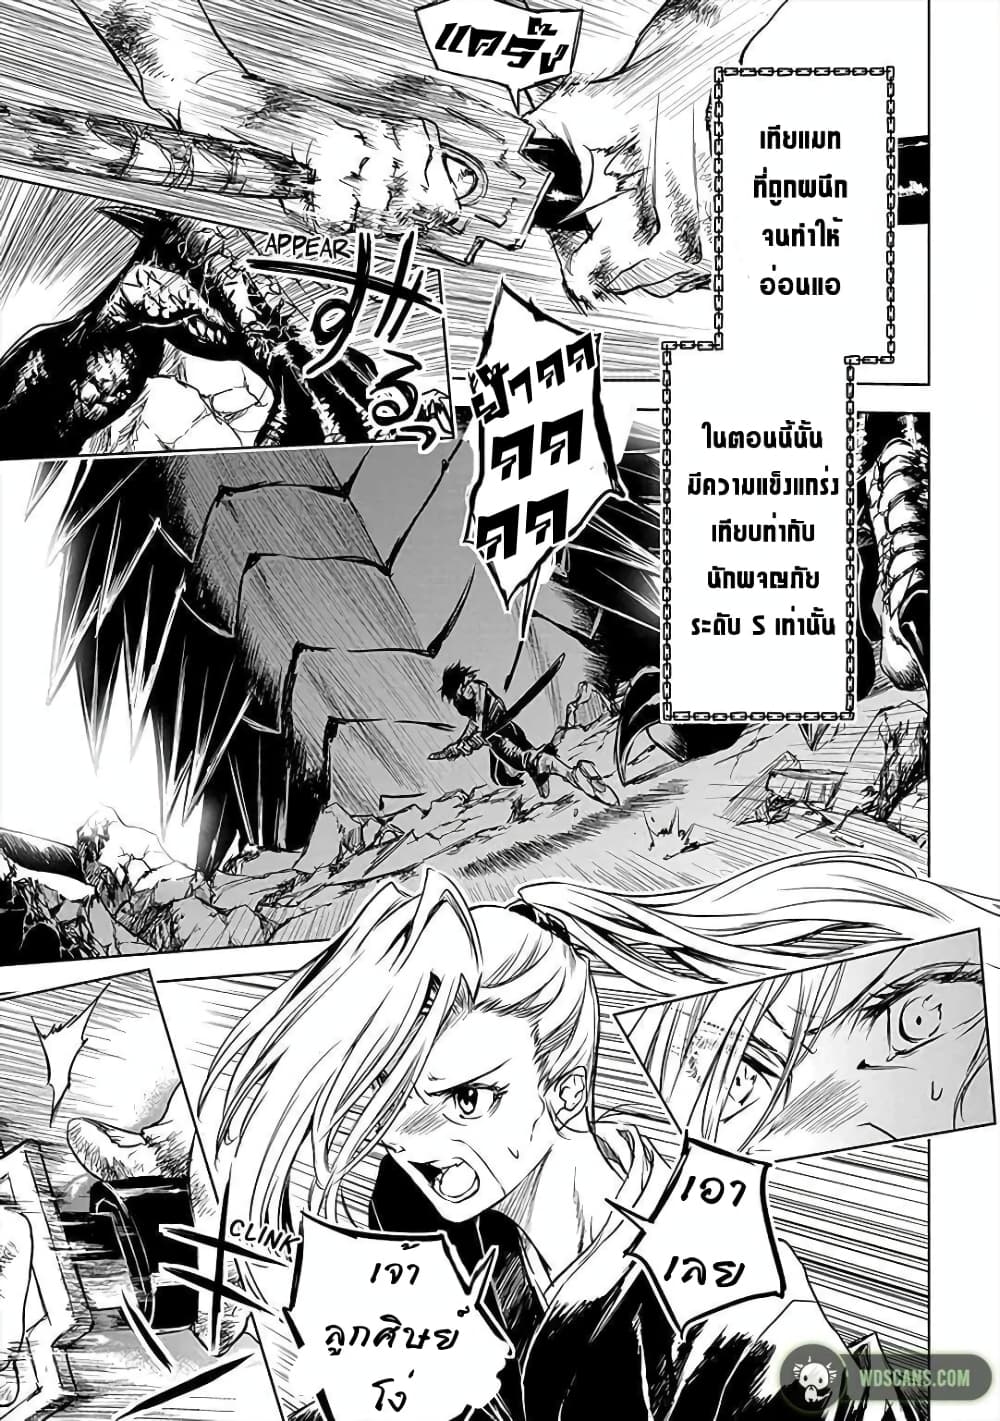 Ori of the Dragon Chain Heart in the Mind 8 (16)